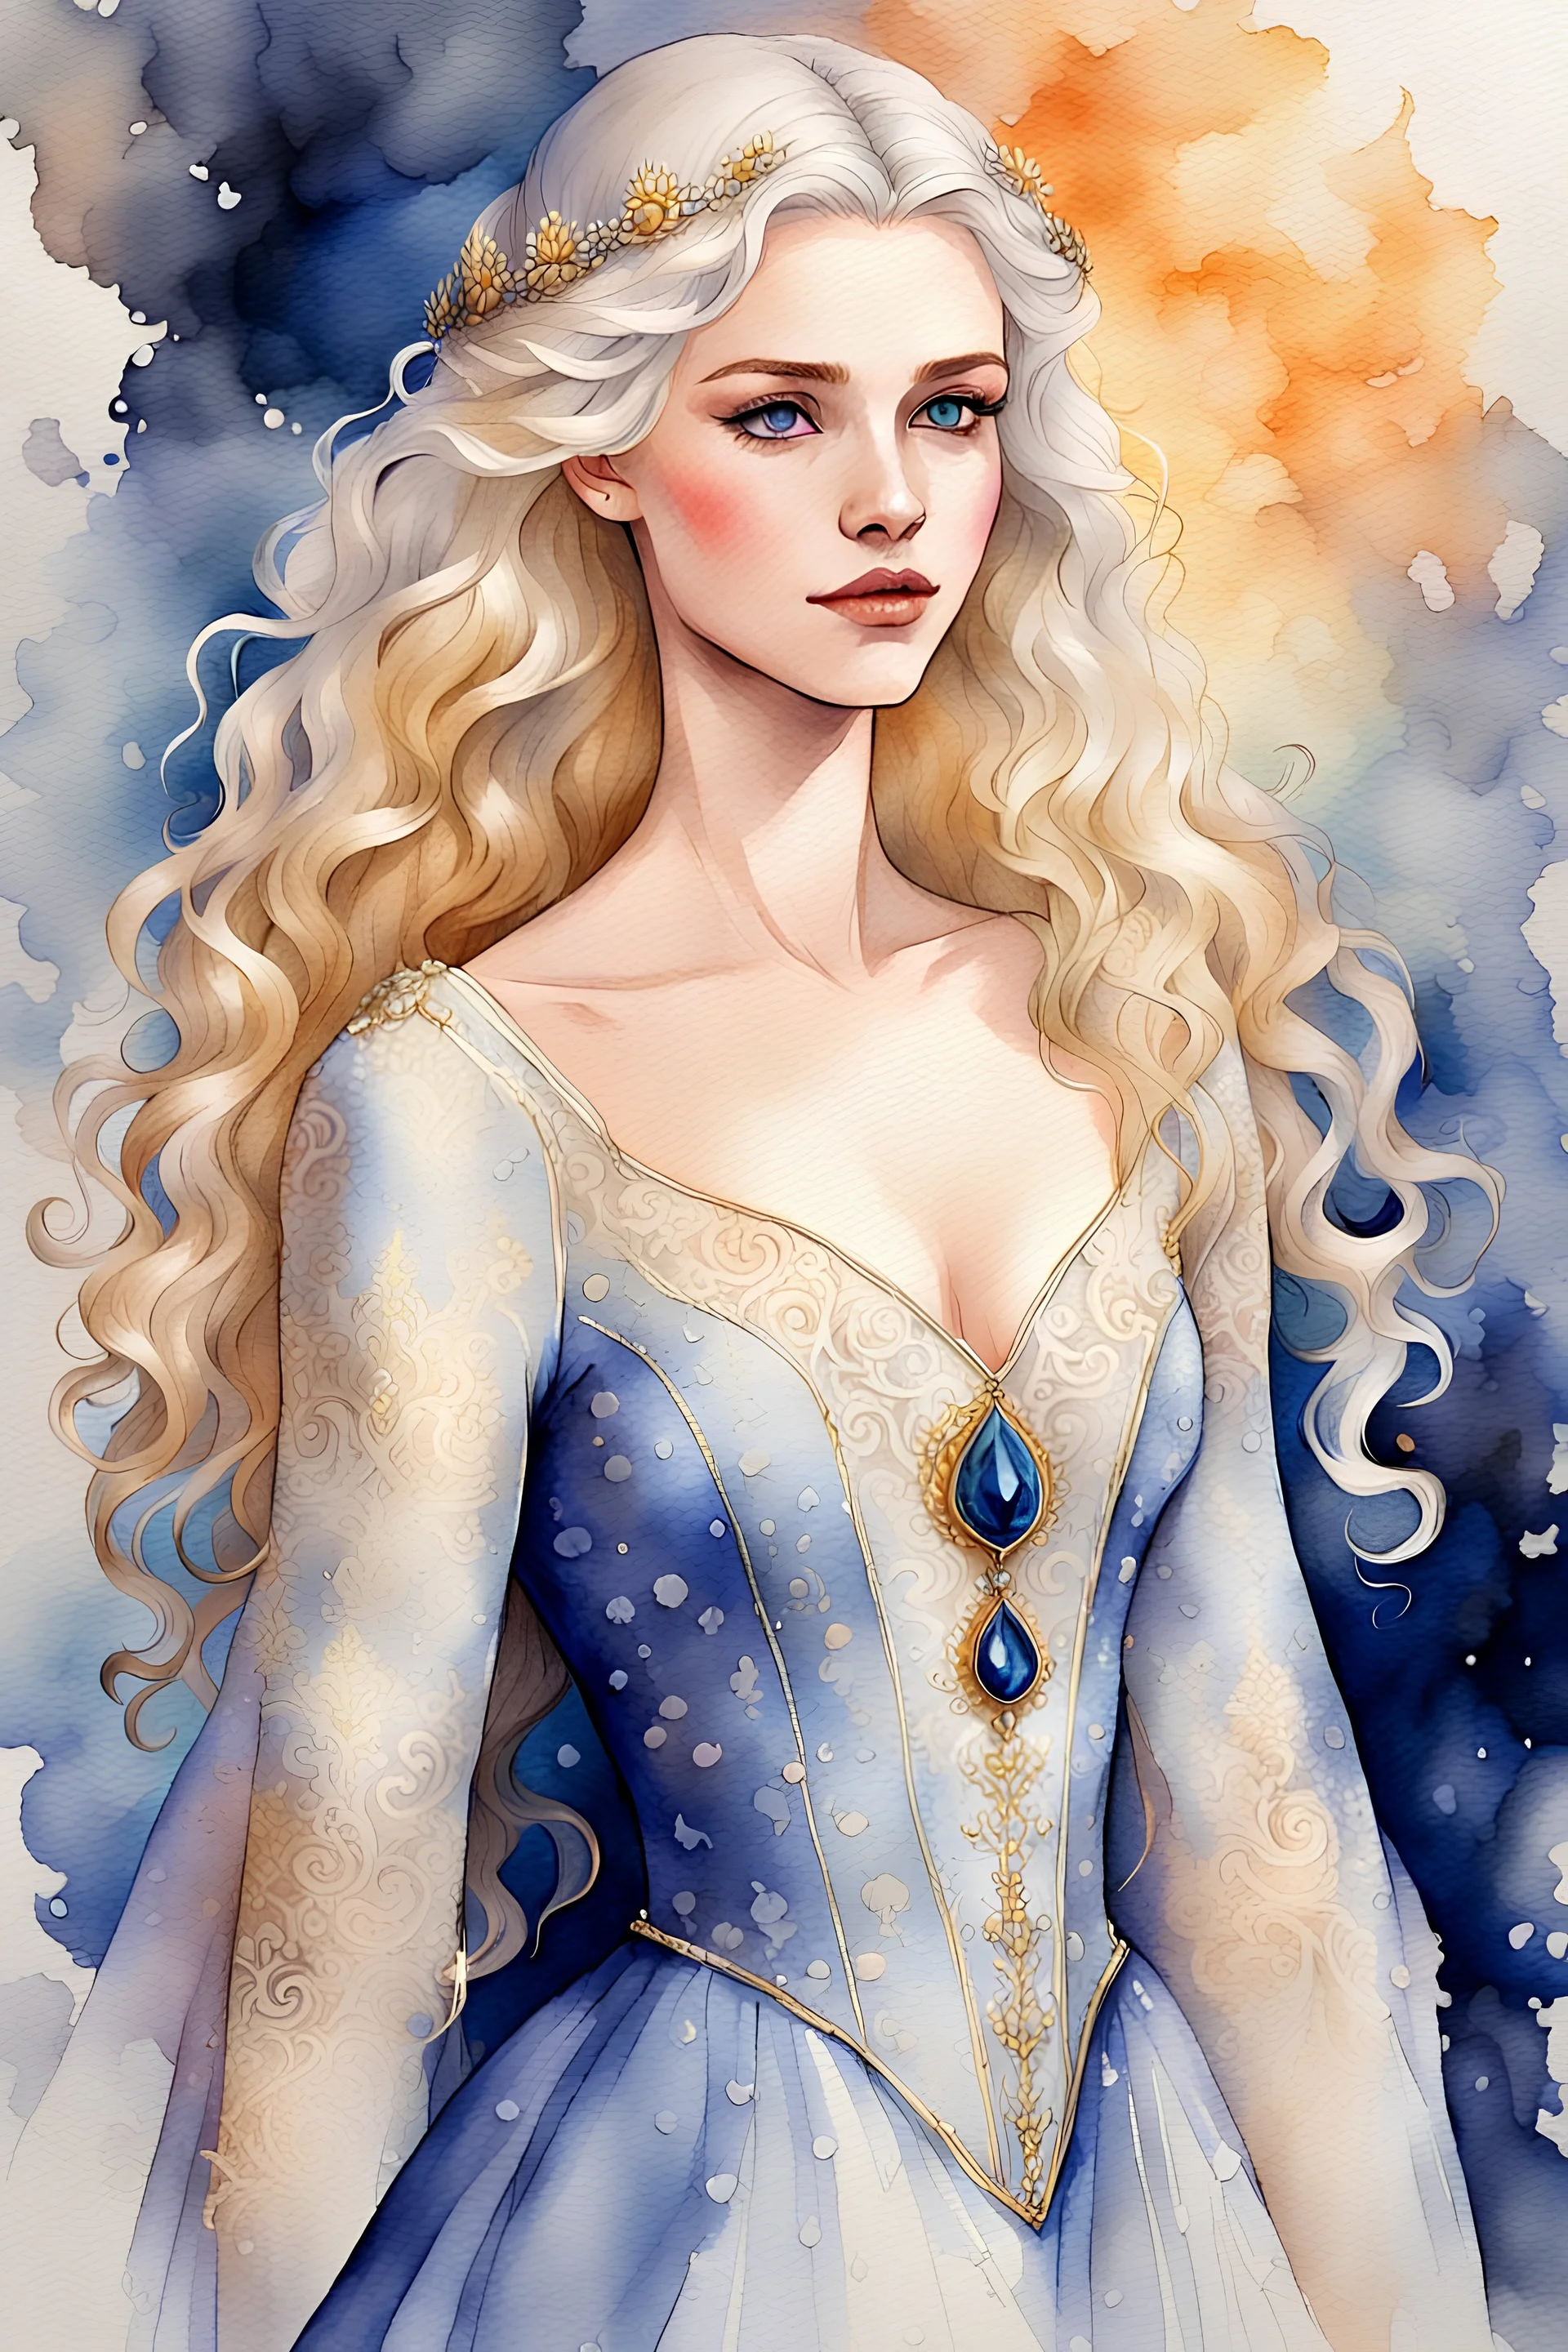 painting watercolour, Maegelle Targaryen, 16, epitomizes Targaryen allure with her golden locks, striking sapphire eyes, and a soft high cheeks. Her slender frame, adorned with delicate features, accentuates her royal elegance, while her graceful movements reflect youthful innocence and curiosity. She wears flowing gowns in lace, silk